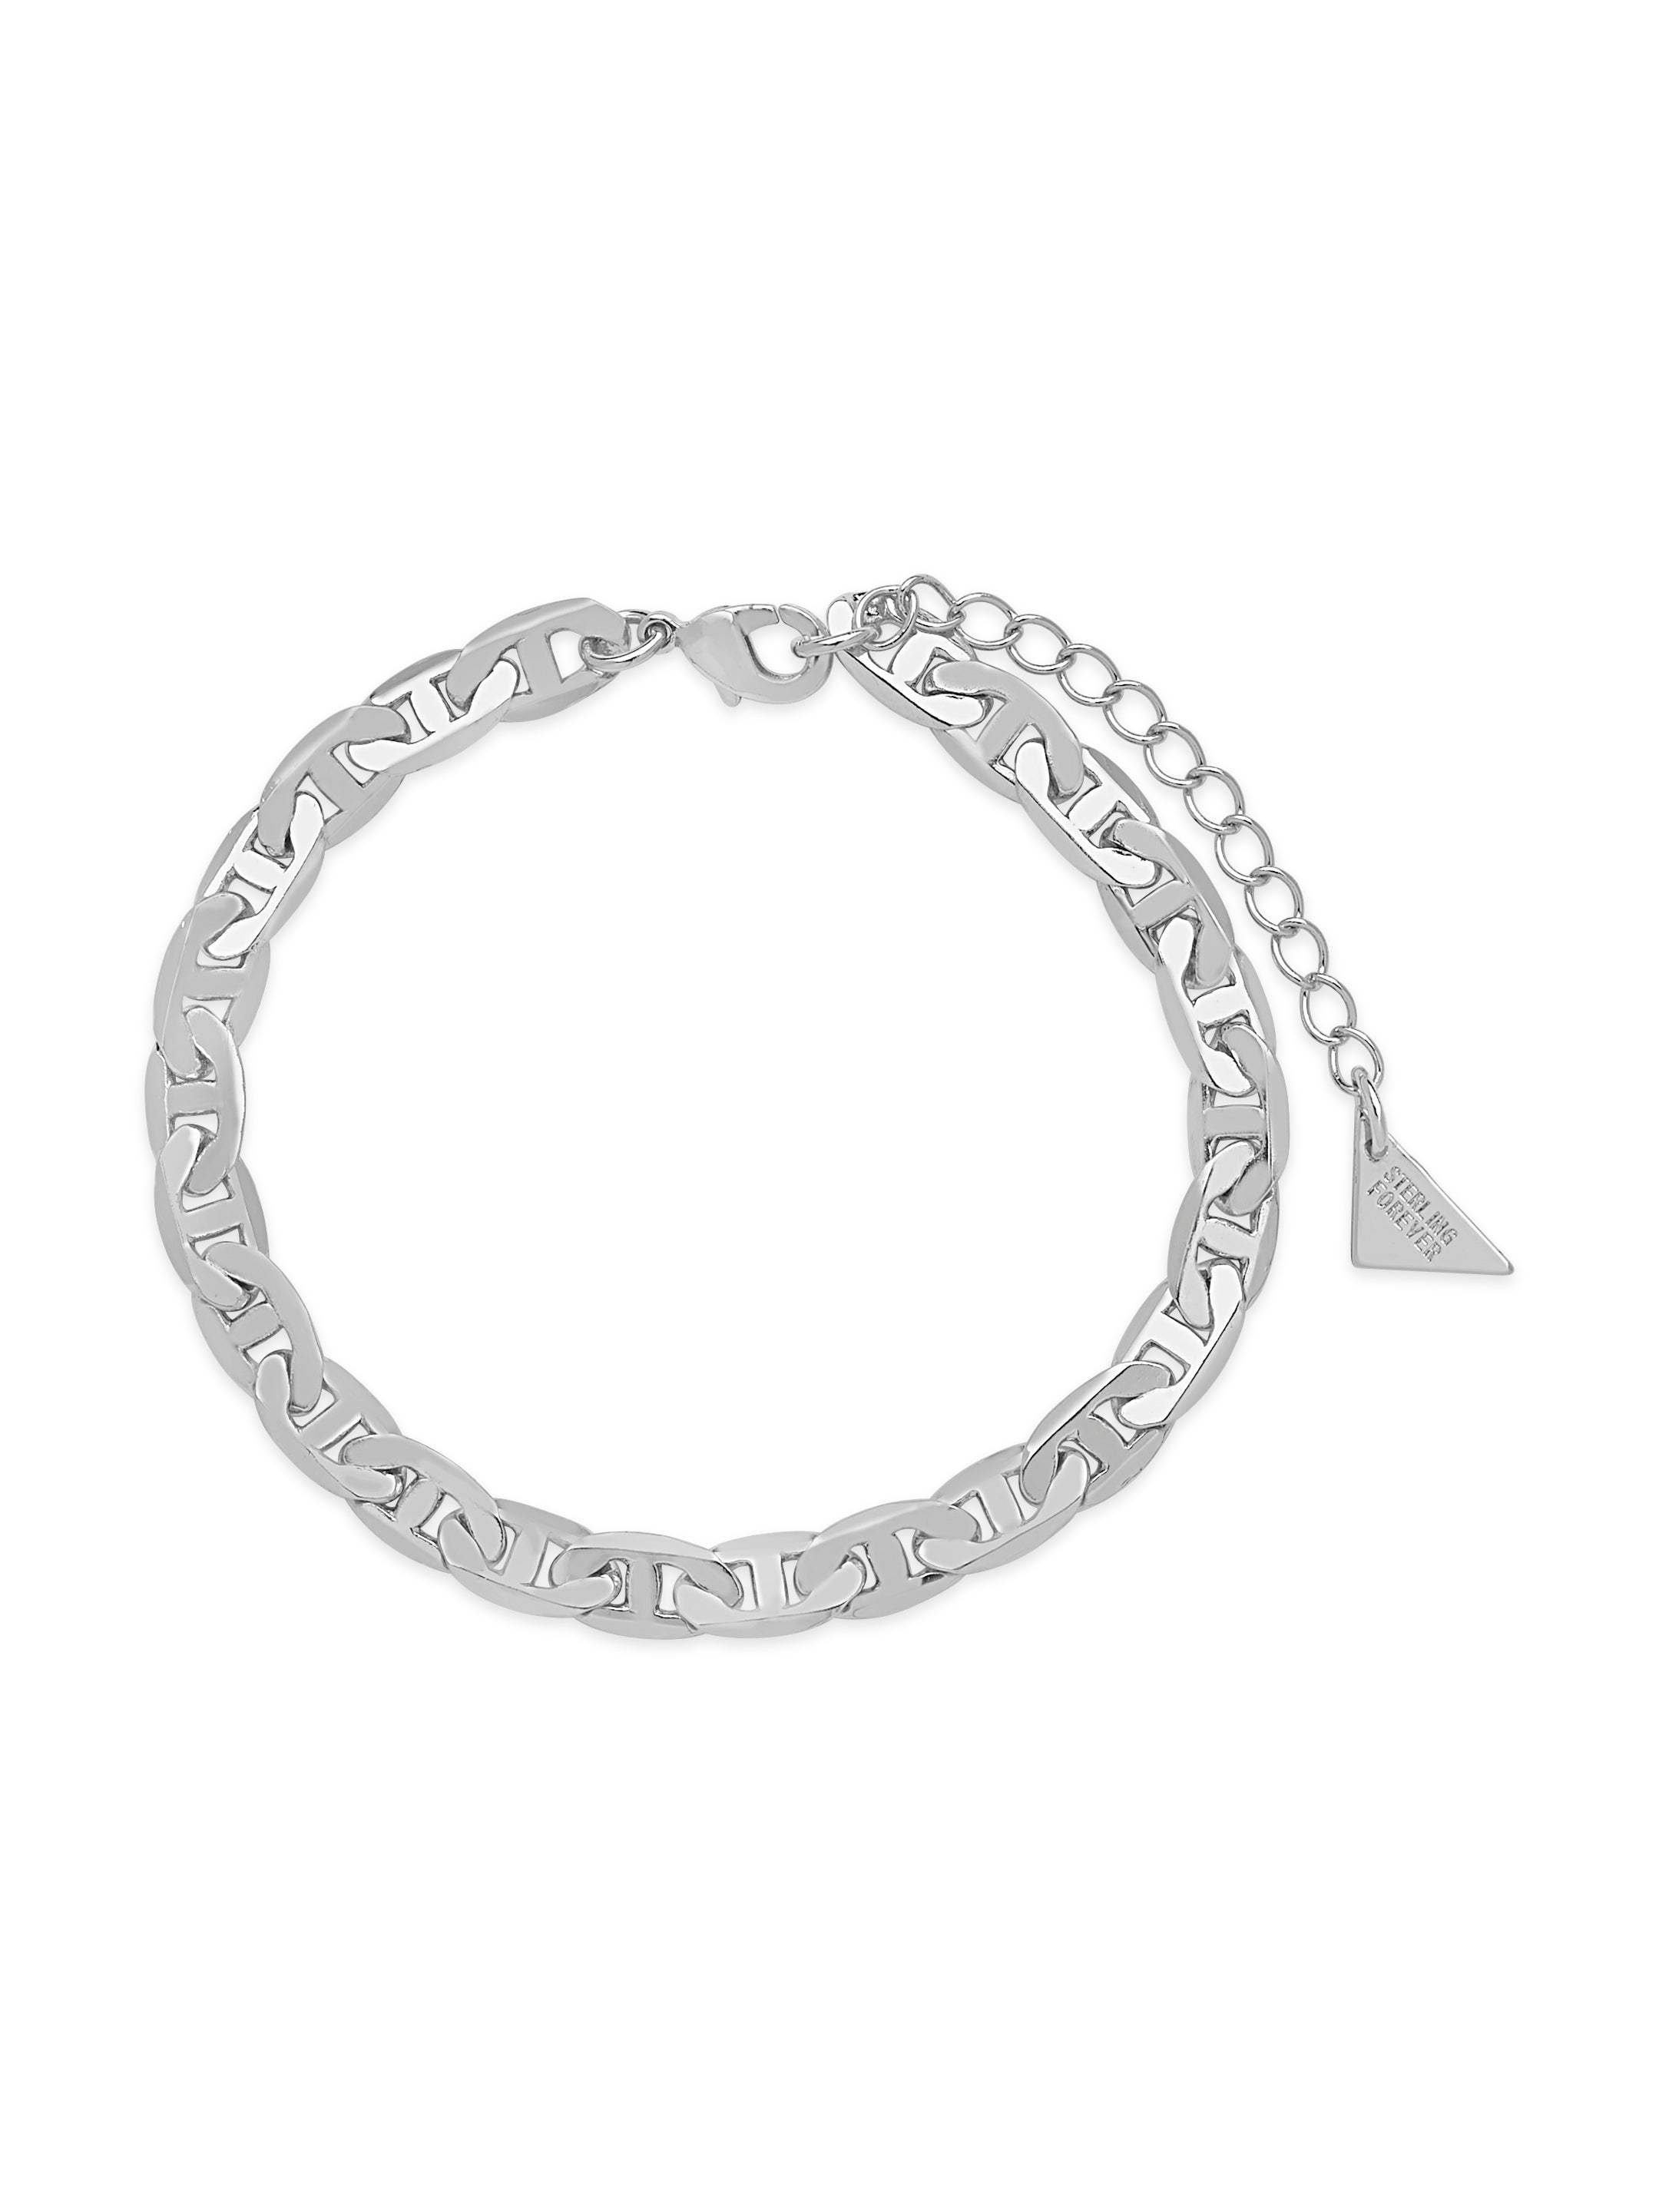 Chunky 925 Sterling Silver Chain Link Bracelet, Geometric Thick Chain Bangle  - Etsy Sweden | Chain link bracelet, Chunky silver bracelet, 925 sterling  silver chain